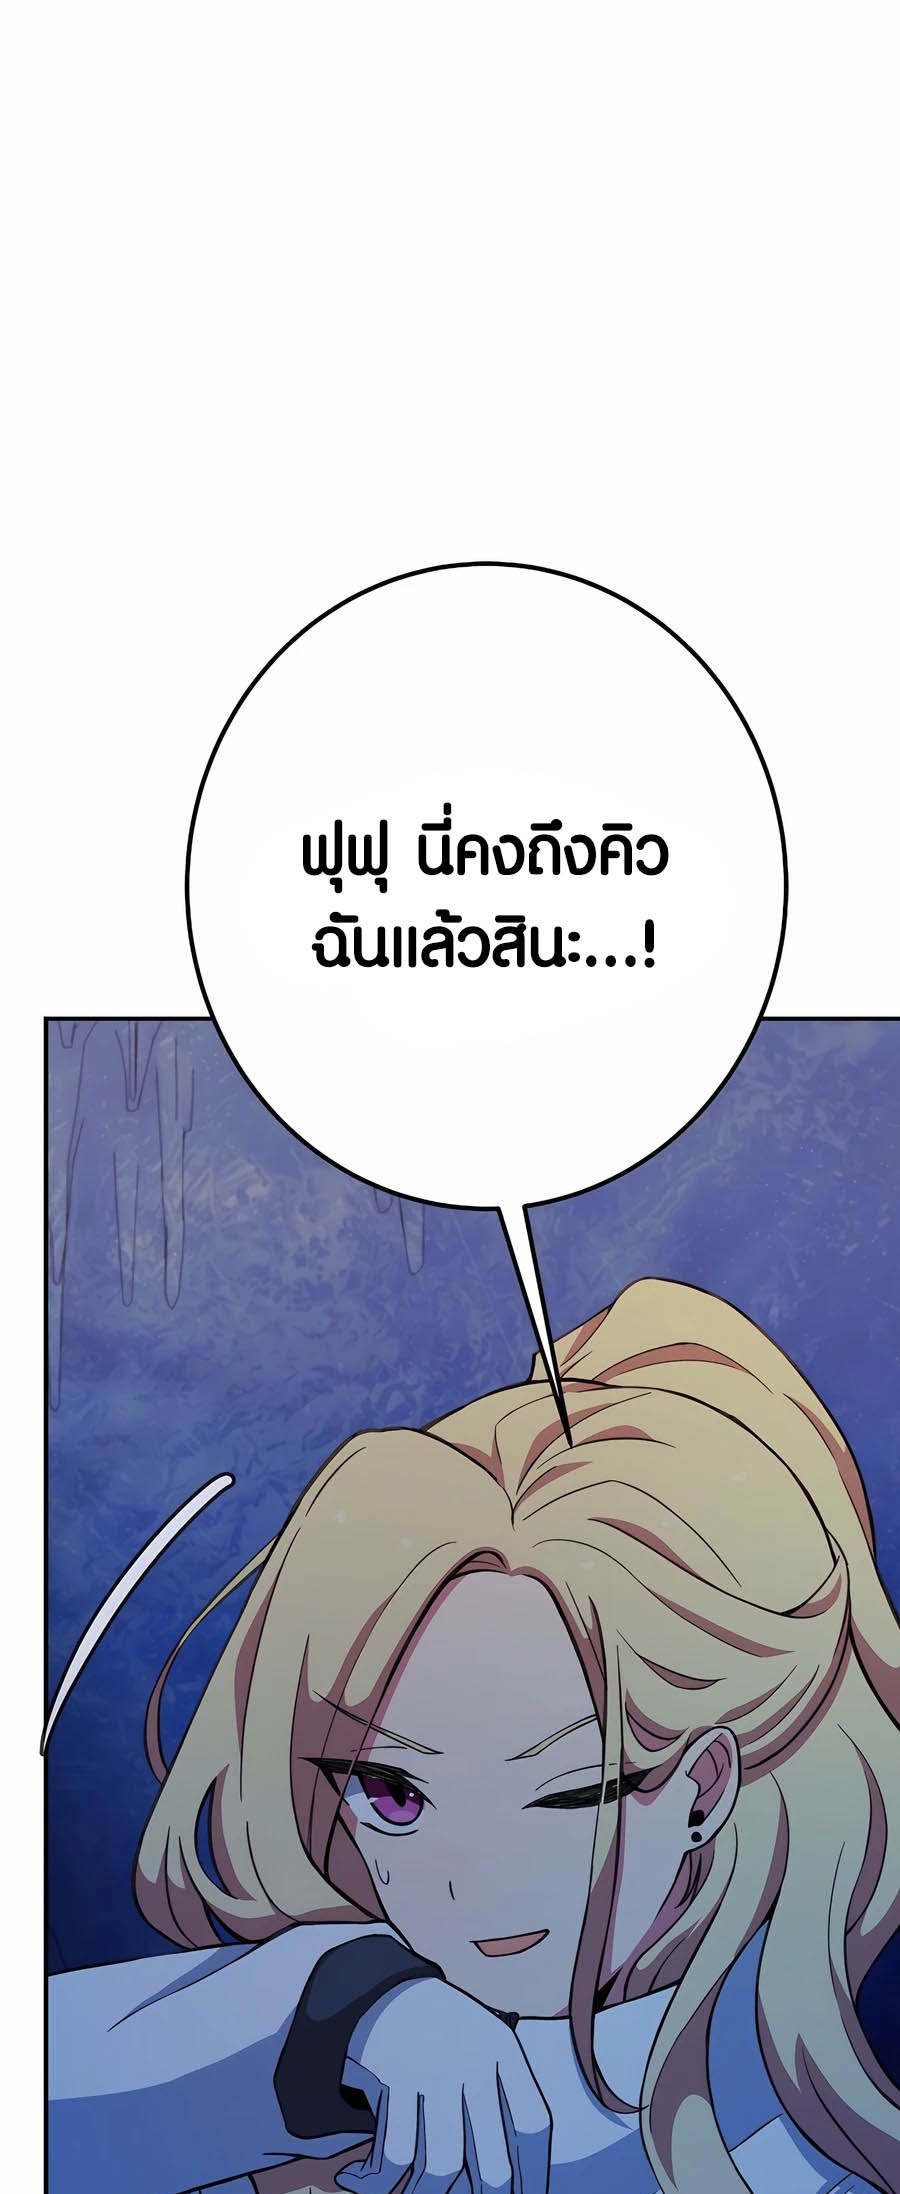 à¸­à¹ˆà¸²à¸™à¸¡à¸±à¸™à¸®à¸§à¸² à¹€à¸£à¸·à¹ˆà¸­à¸‡ The Part Time Land of the Gods 57 47